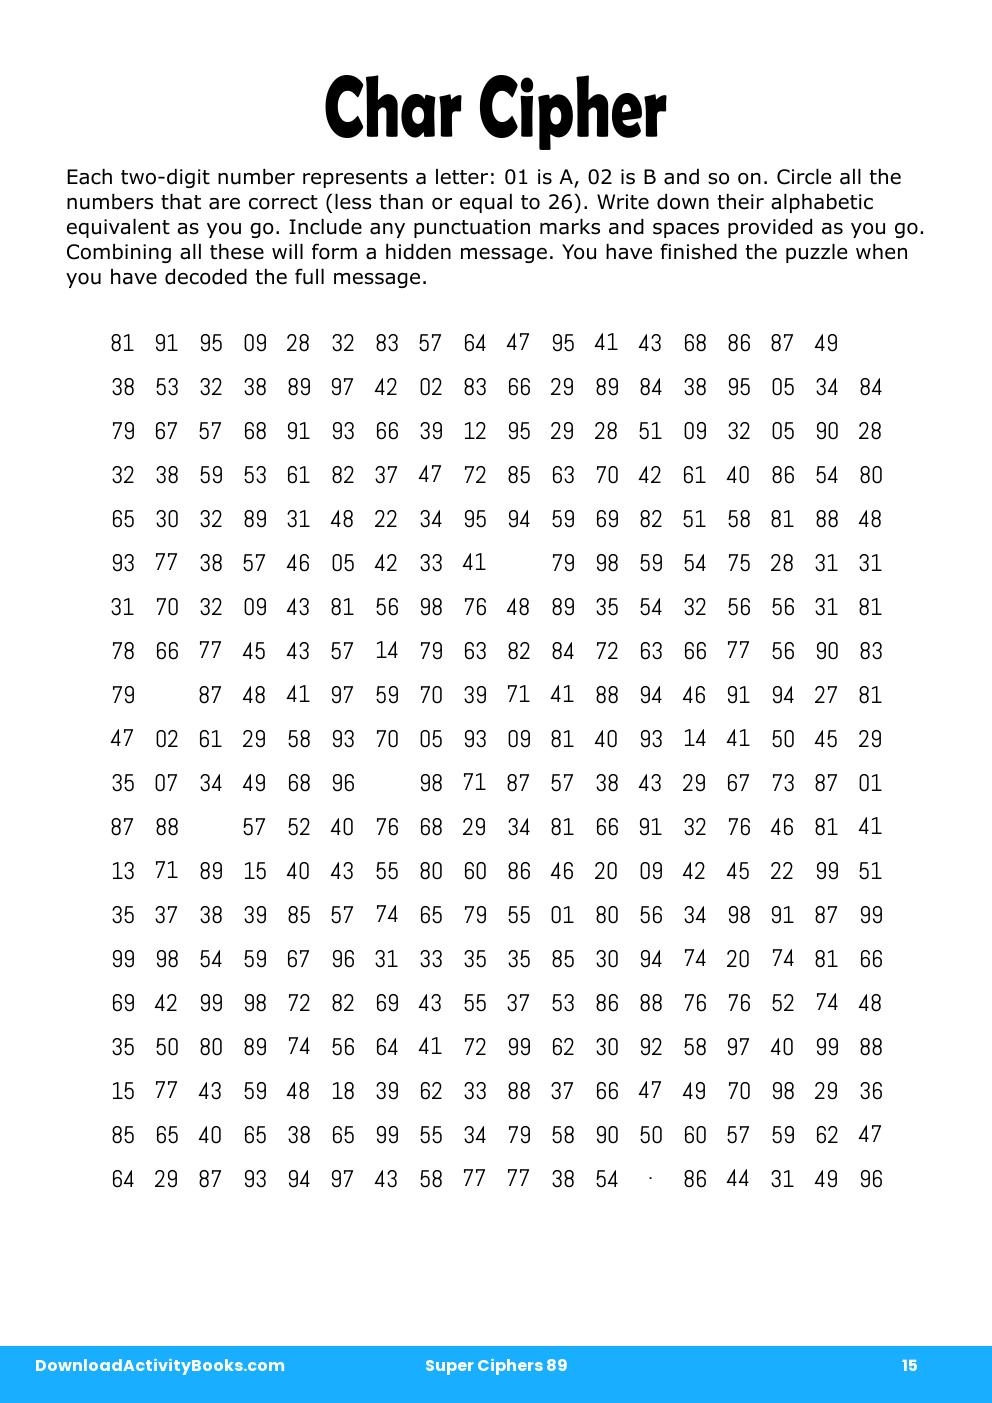 Char Cipher in Super Ciphers 89